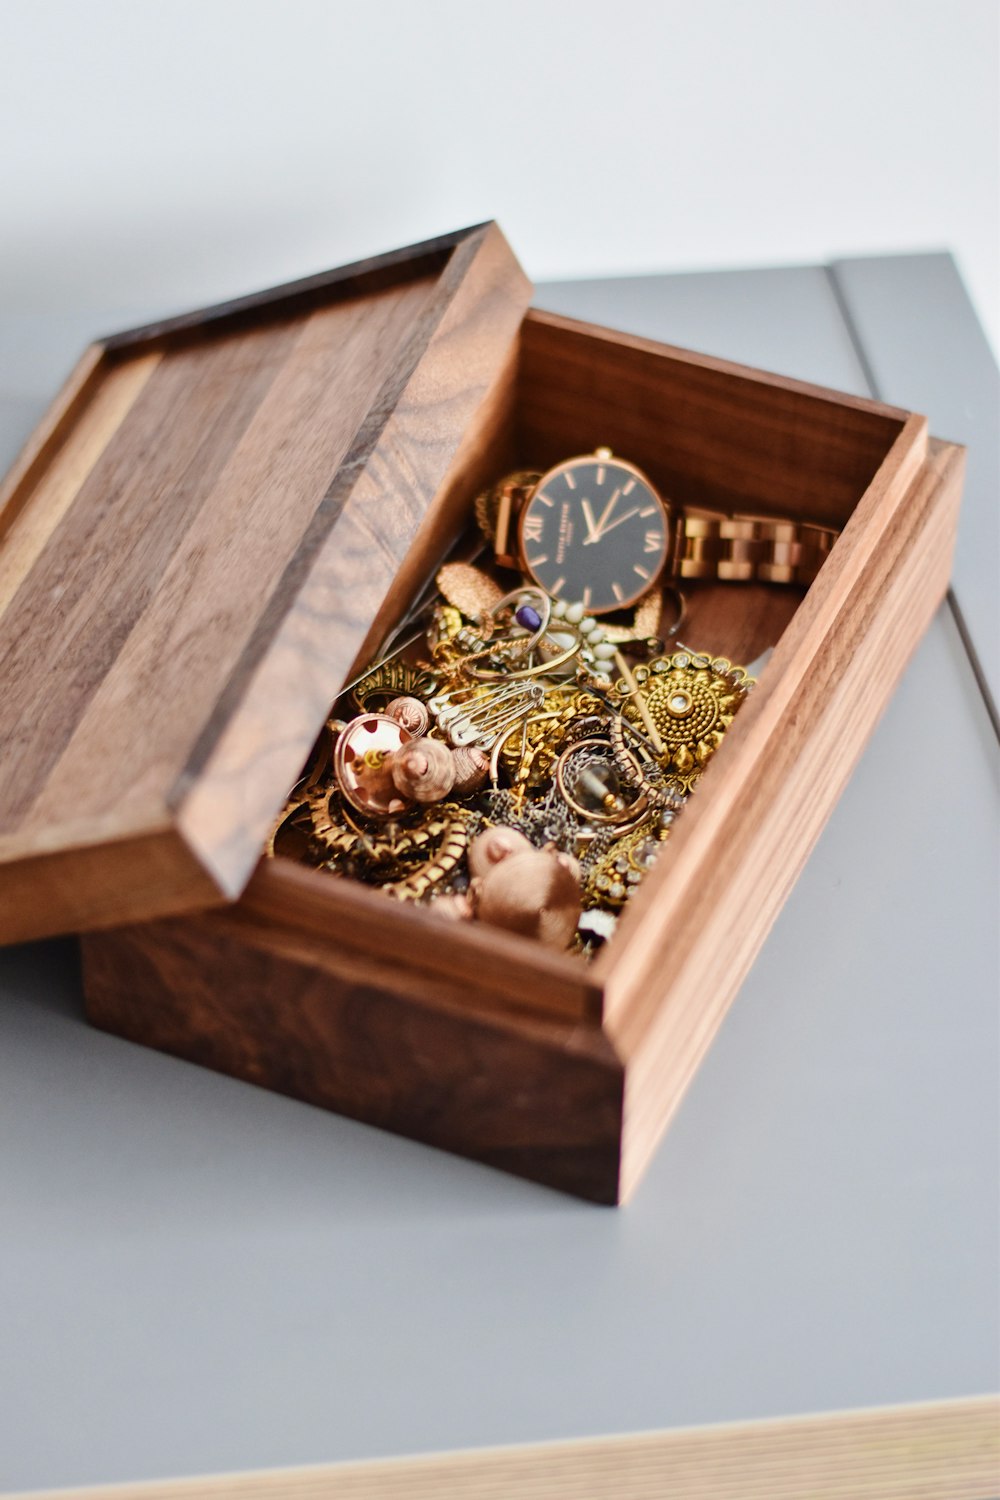 gold watch and pendant on brown wooden box